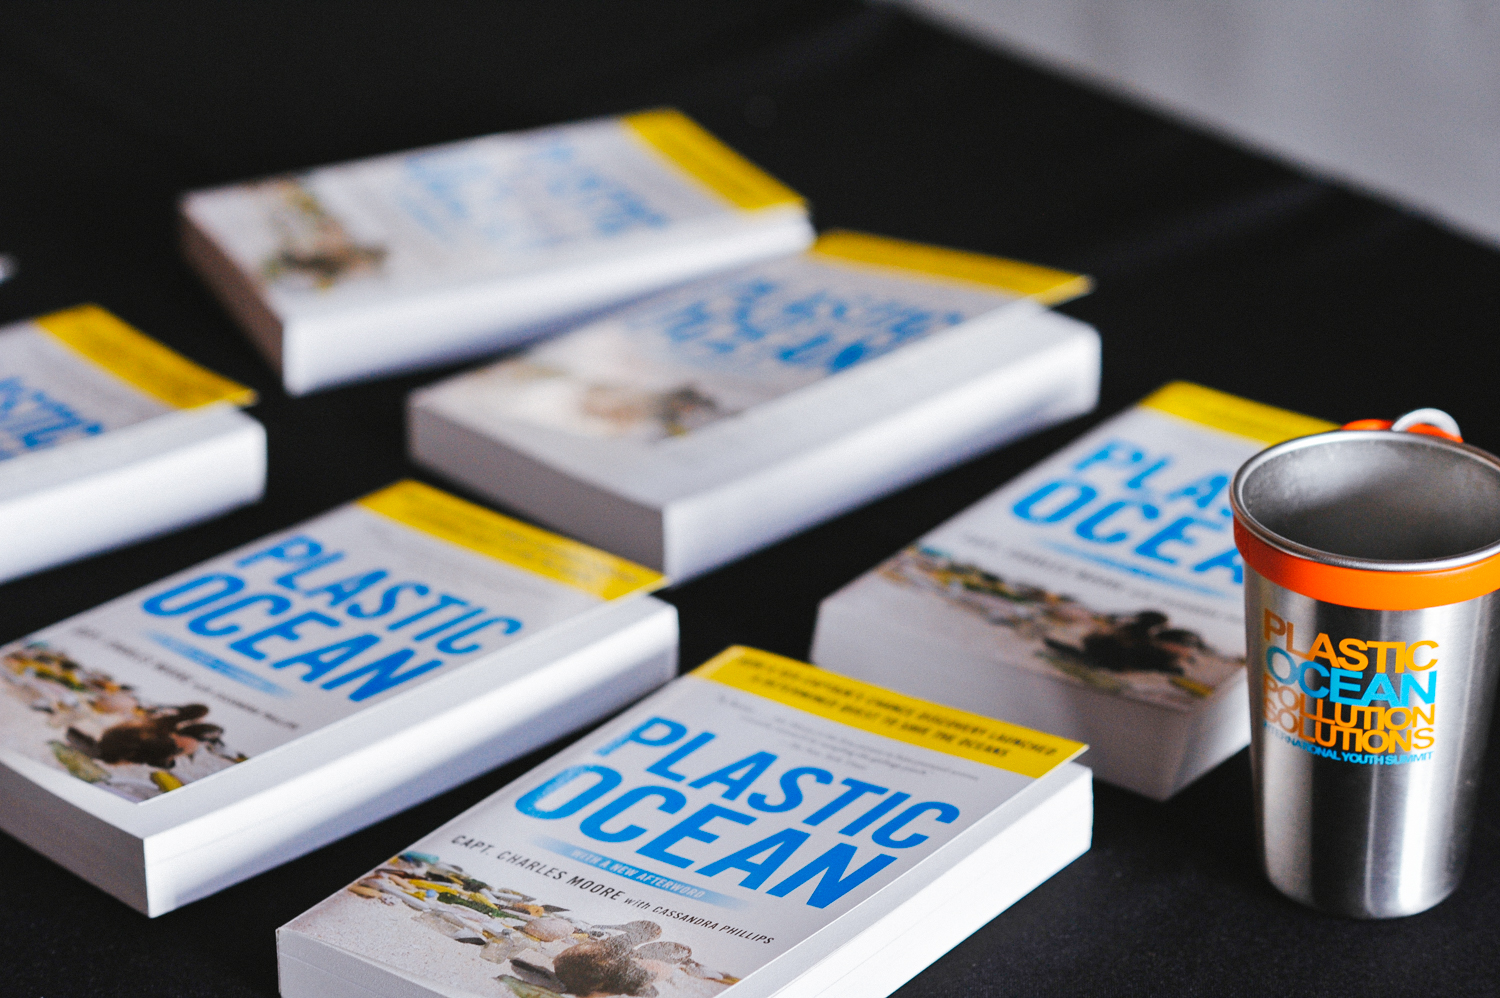 Project image card - copies of the book Plastic Ocean on a table